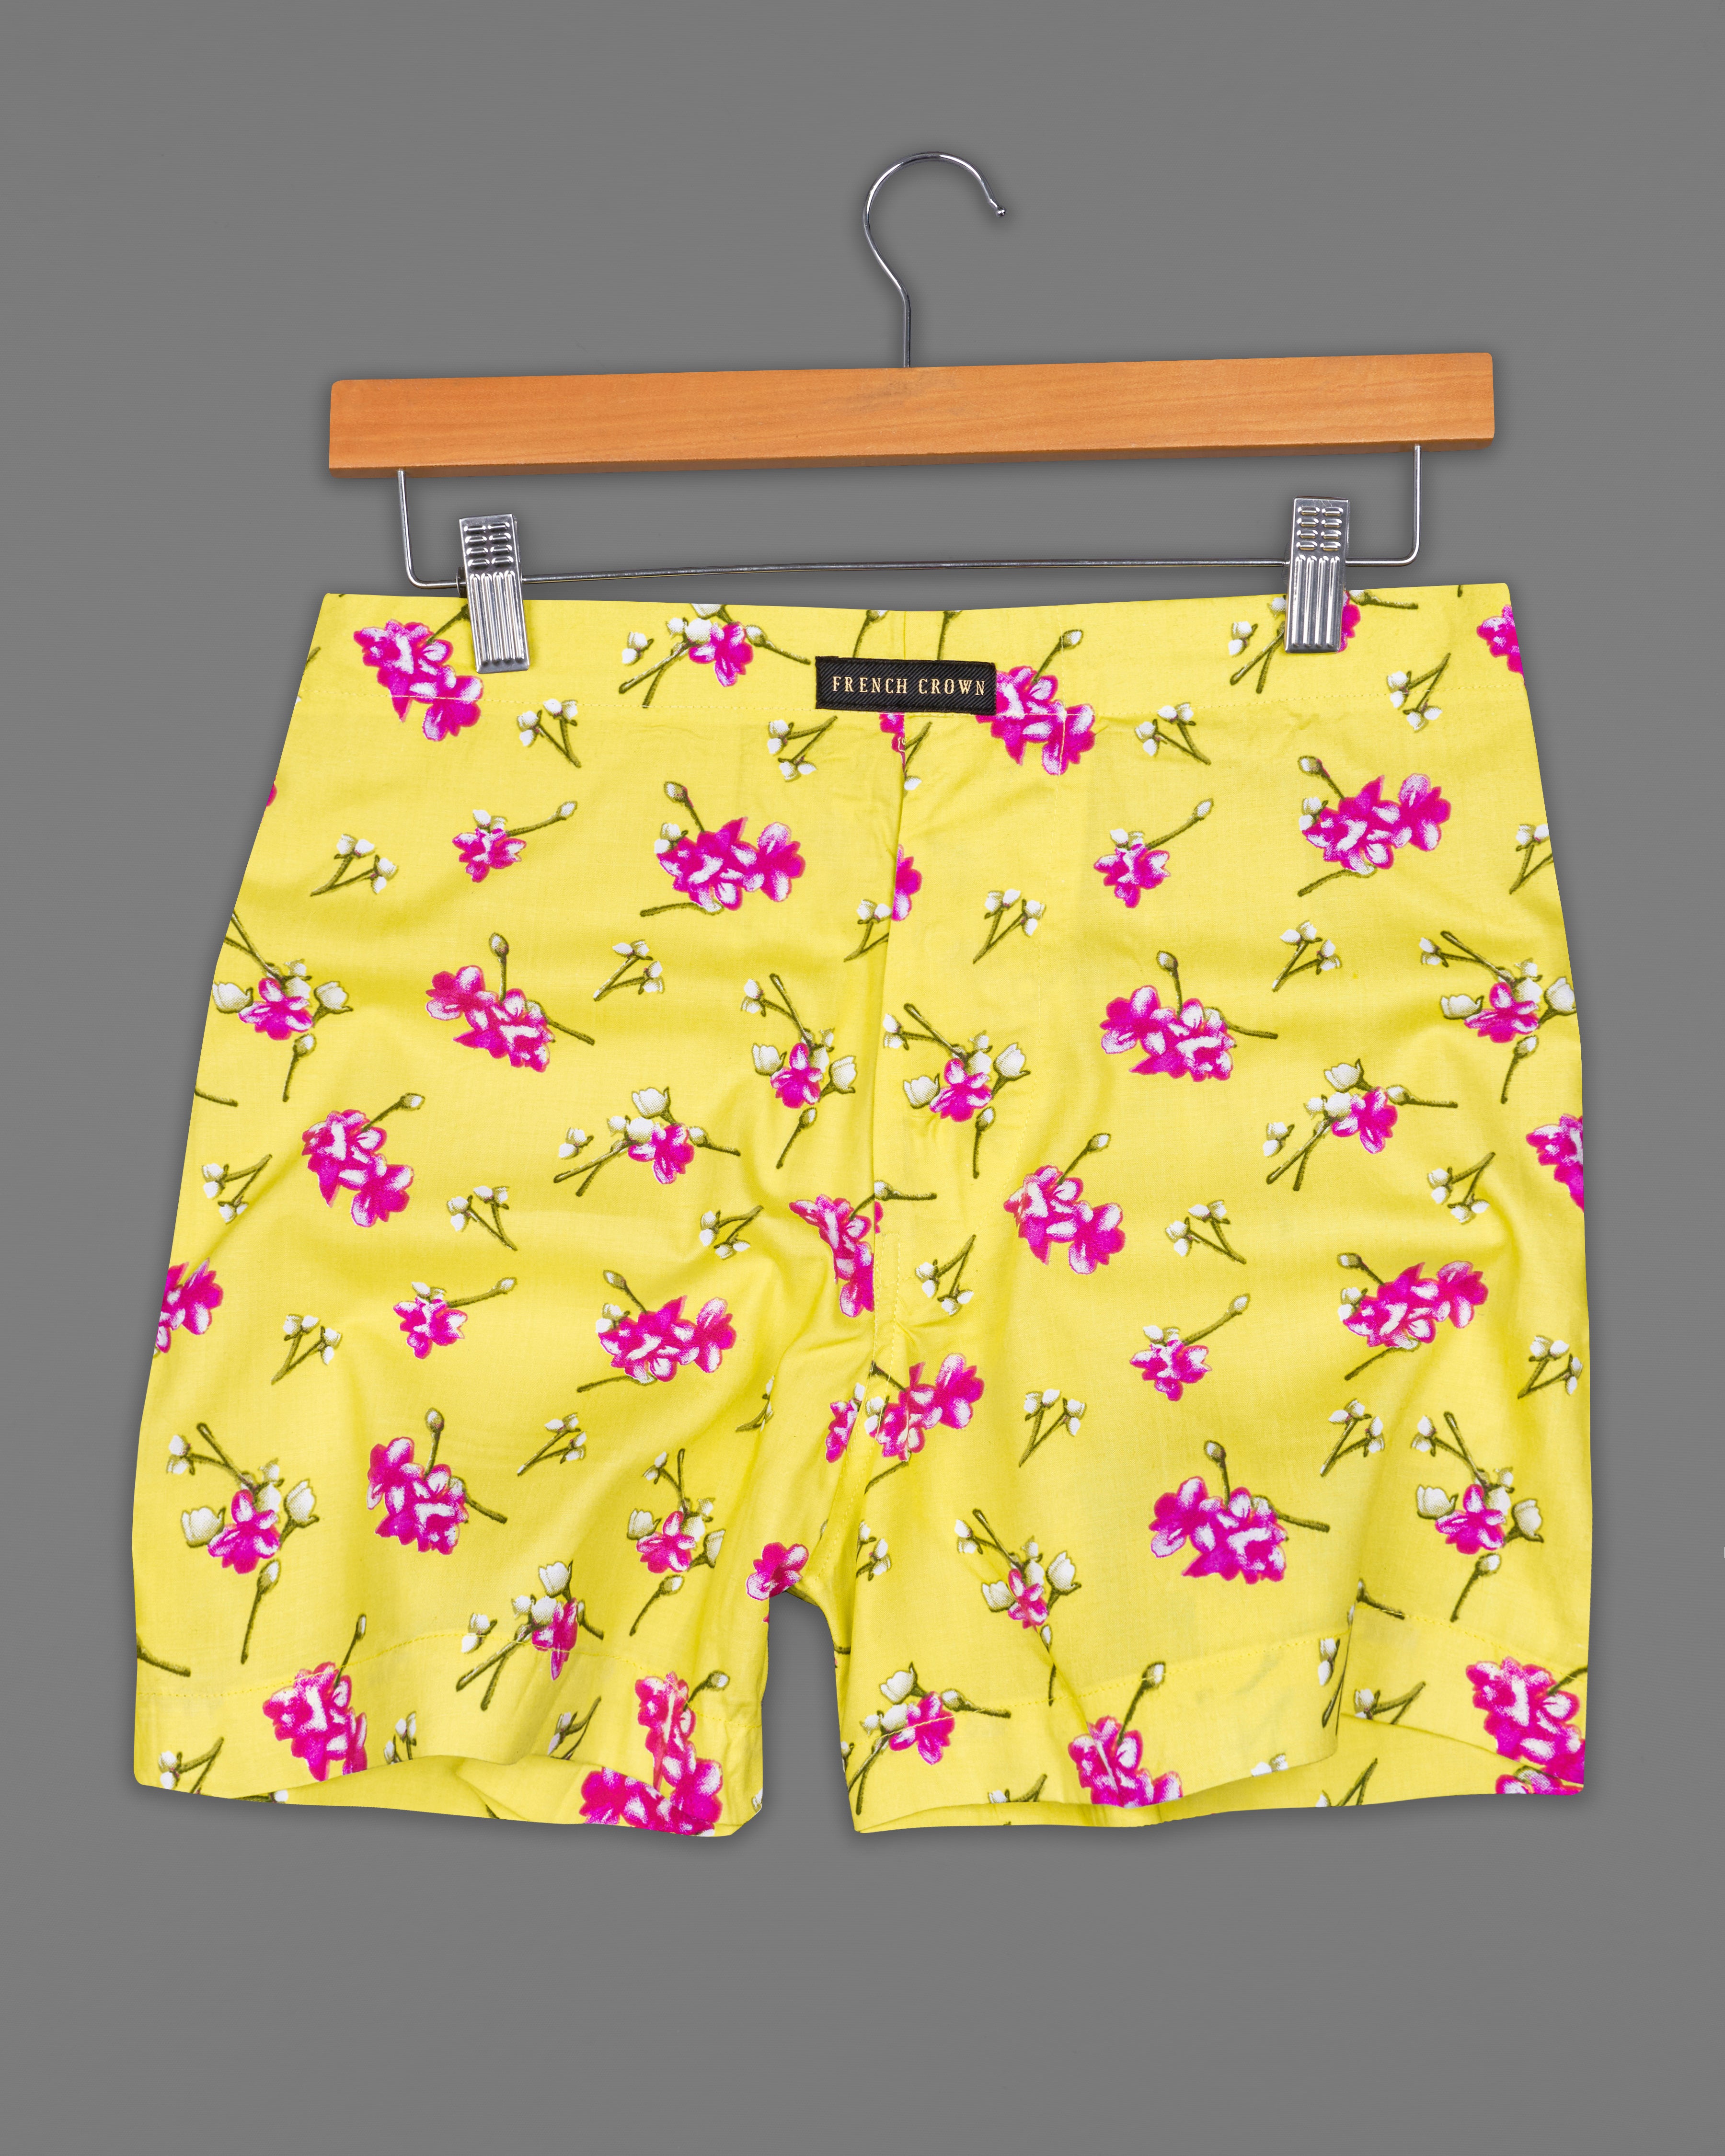 Bright White Floral Printed with Desert Storm Yellow Floral Printed Premium Cotton Boxers BX494-BX449-28, BX494-BX449-30, BX494-BX449-32, BX494-BX449-34, BX494-BX449-36, BX494-BX449-38, BX494-BX449-40, BX494-BX449-42, BX494-BX449-44